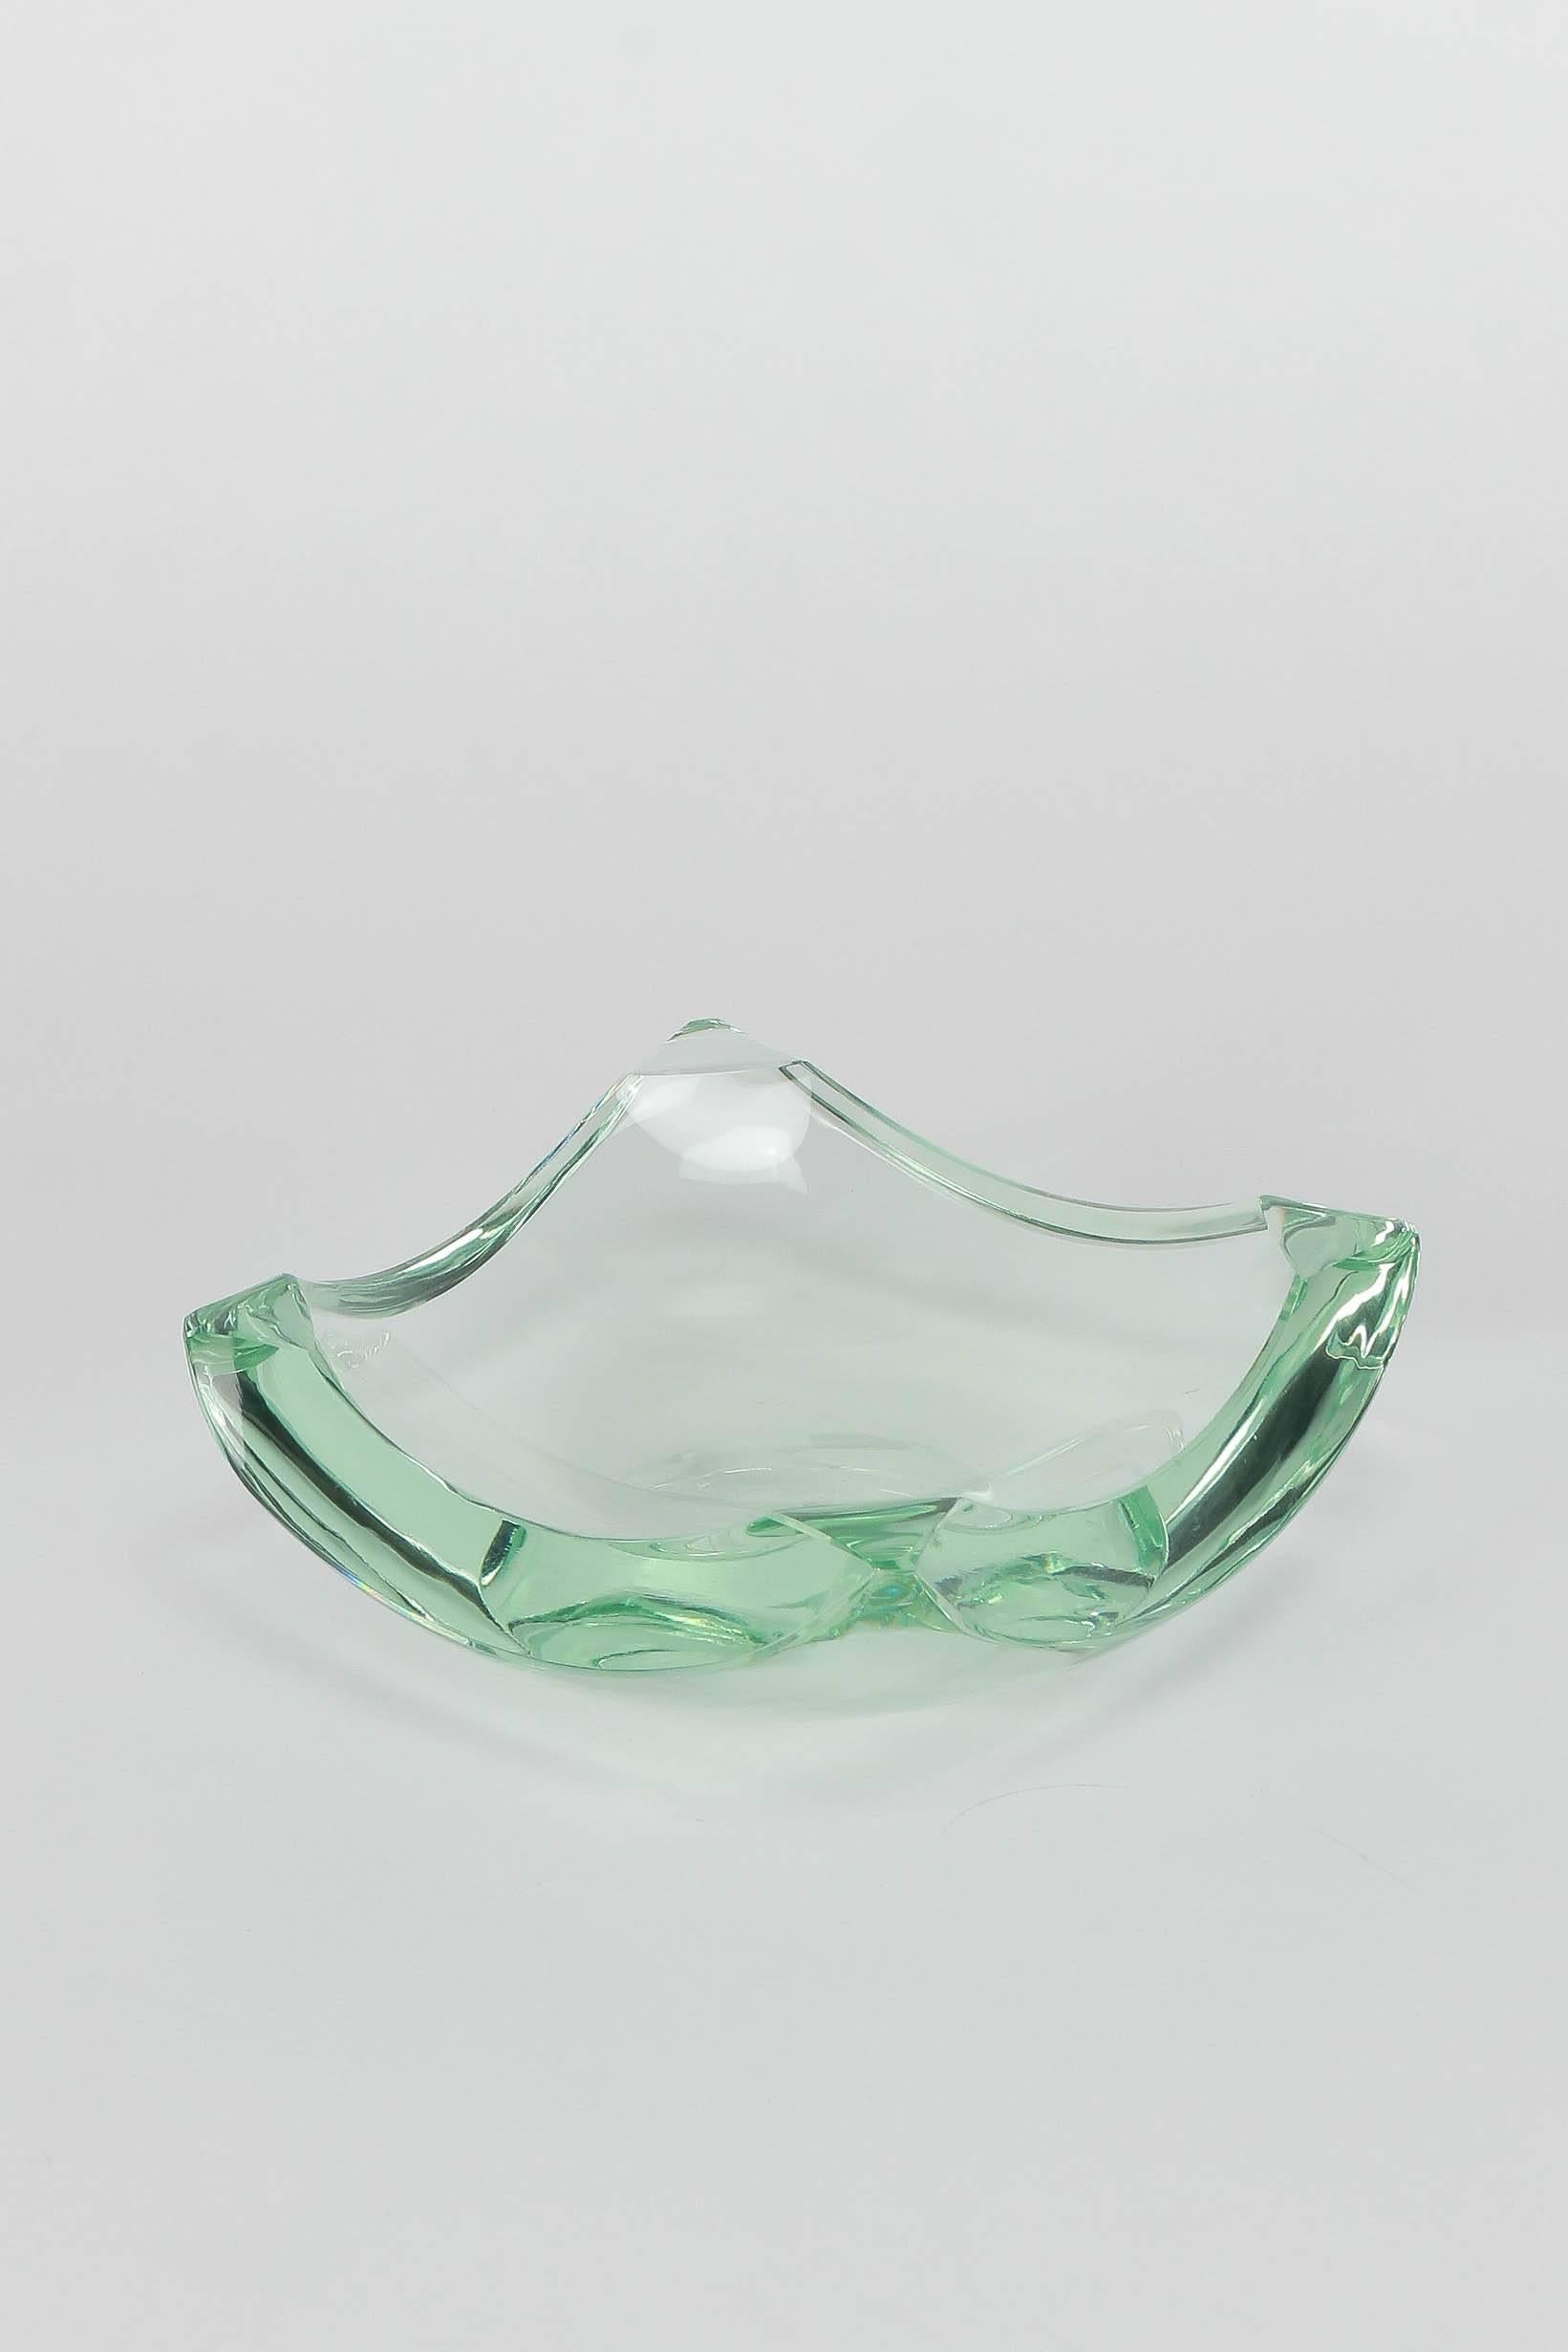 A stunning bowl or ashtray by Erwin Burger for the Italian manufacturer Fontana Arte in the 1950s. Entirely made of glass, flat polished corners.